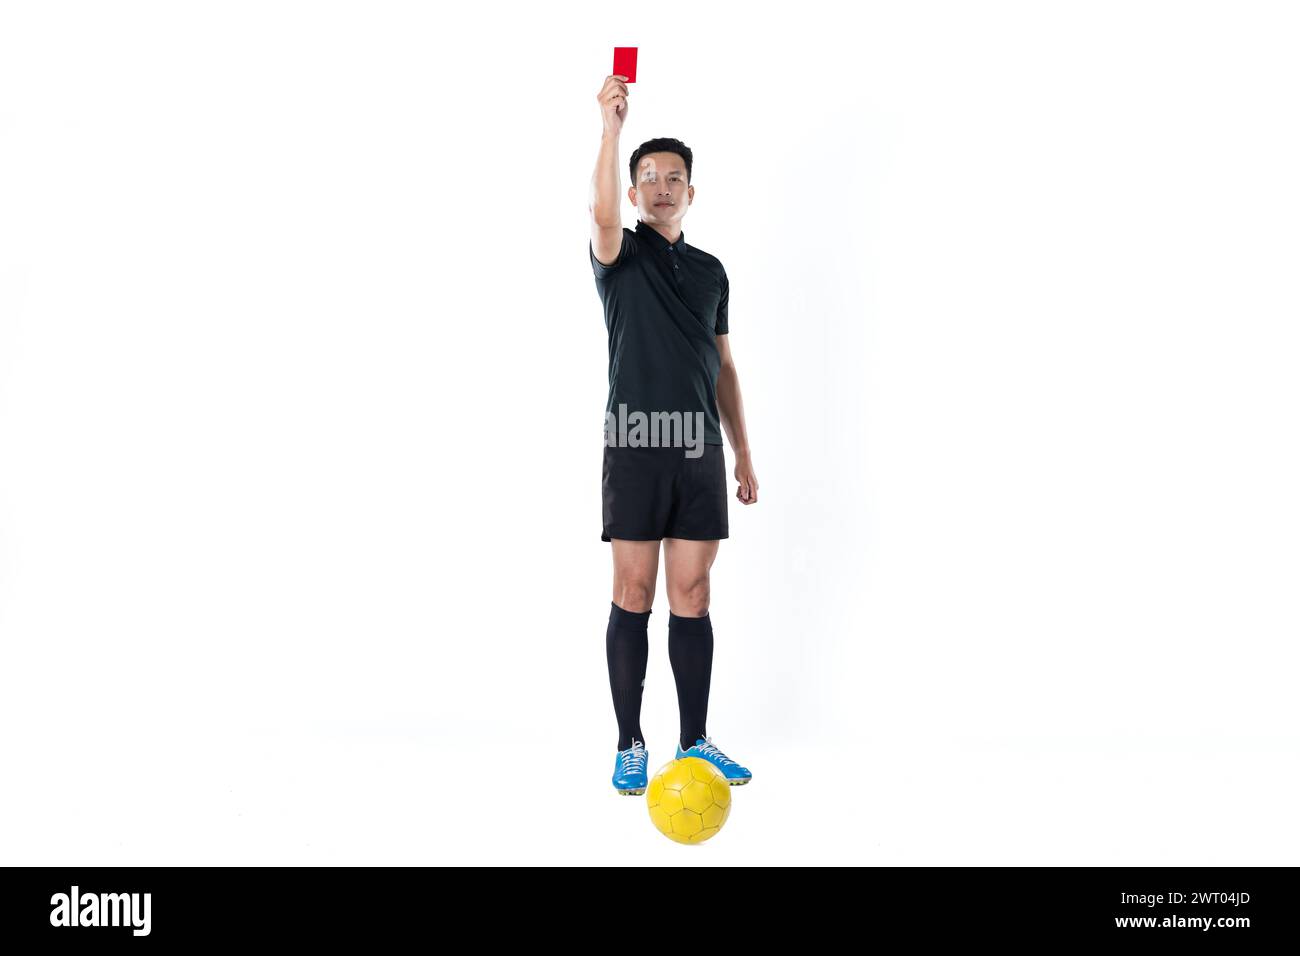 Full length portrait of a football referee giving a red card isolated on white background. Stock Photo